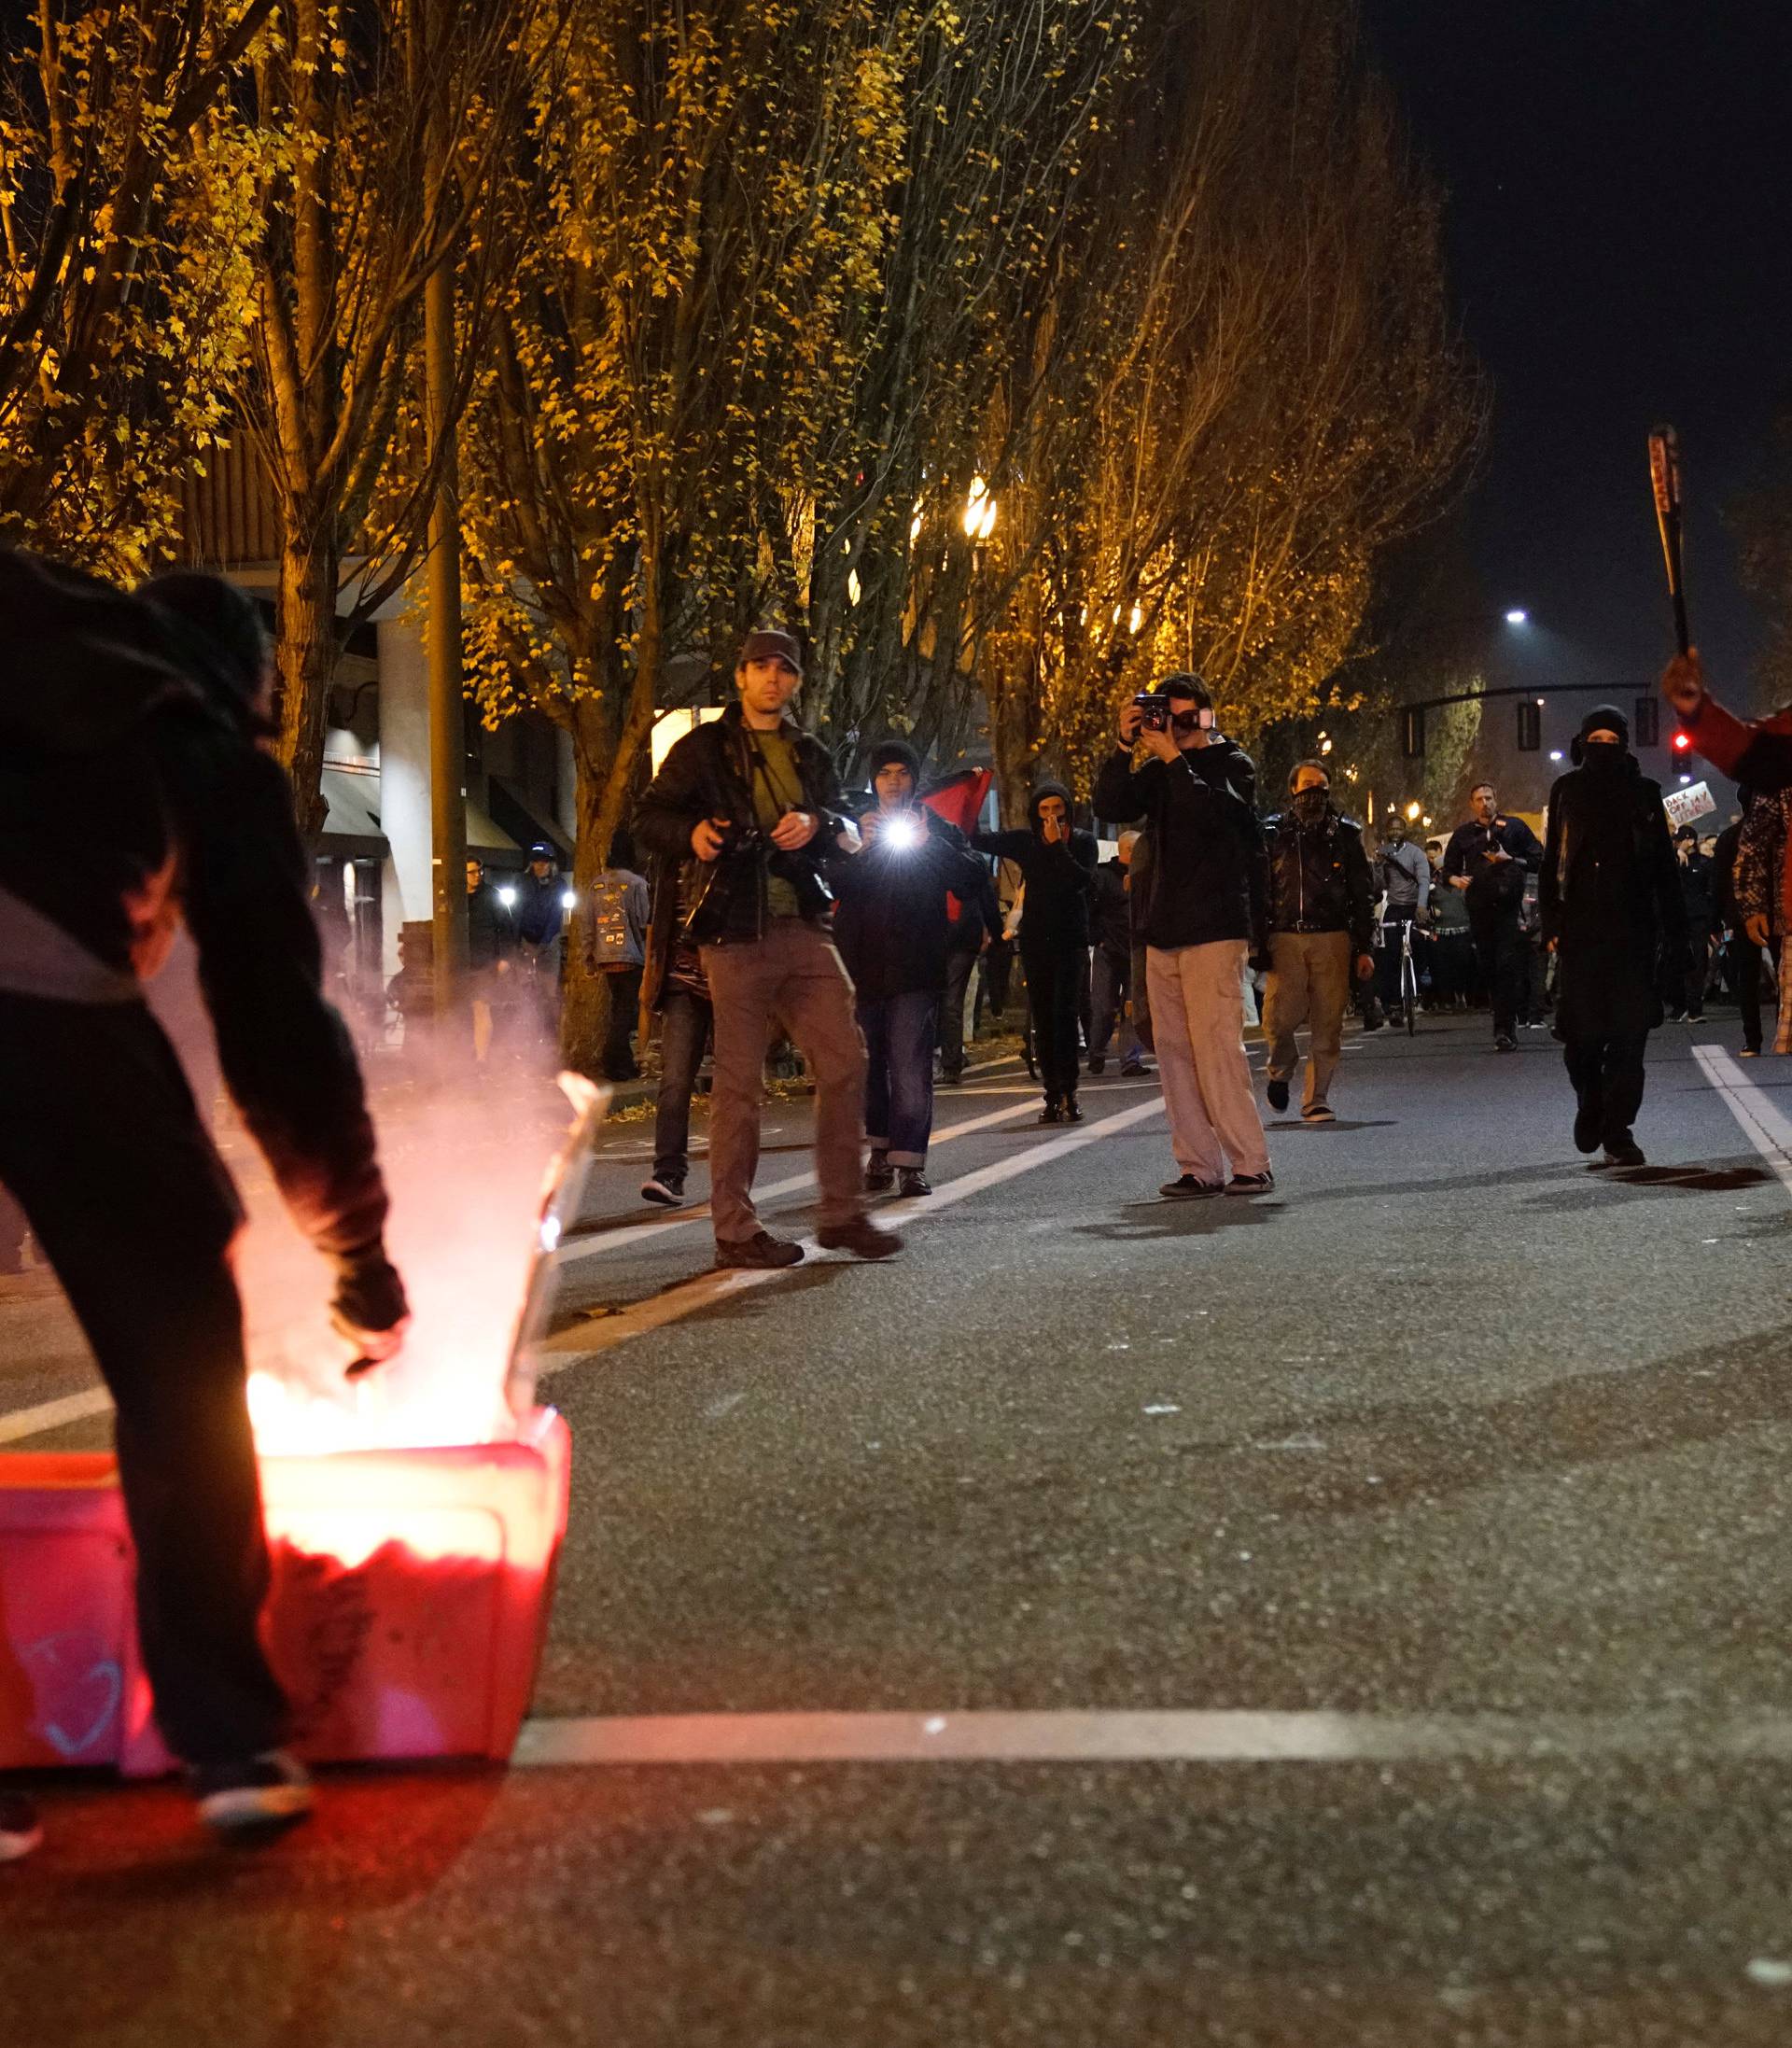 A demonstrator sets a news rack on fire as another wields a baseball bat during a protest against the election of Republican Donald Trump as President of the United States in Portland